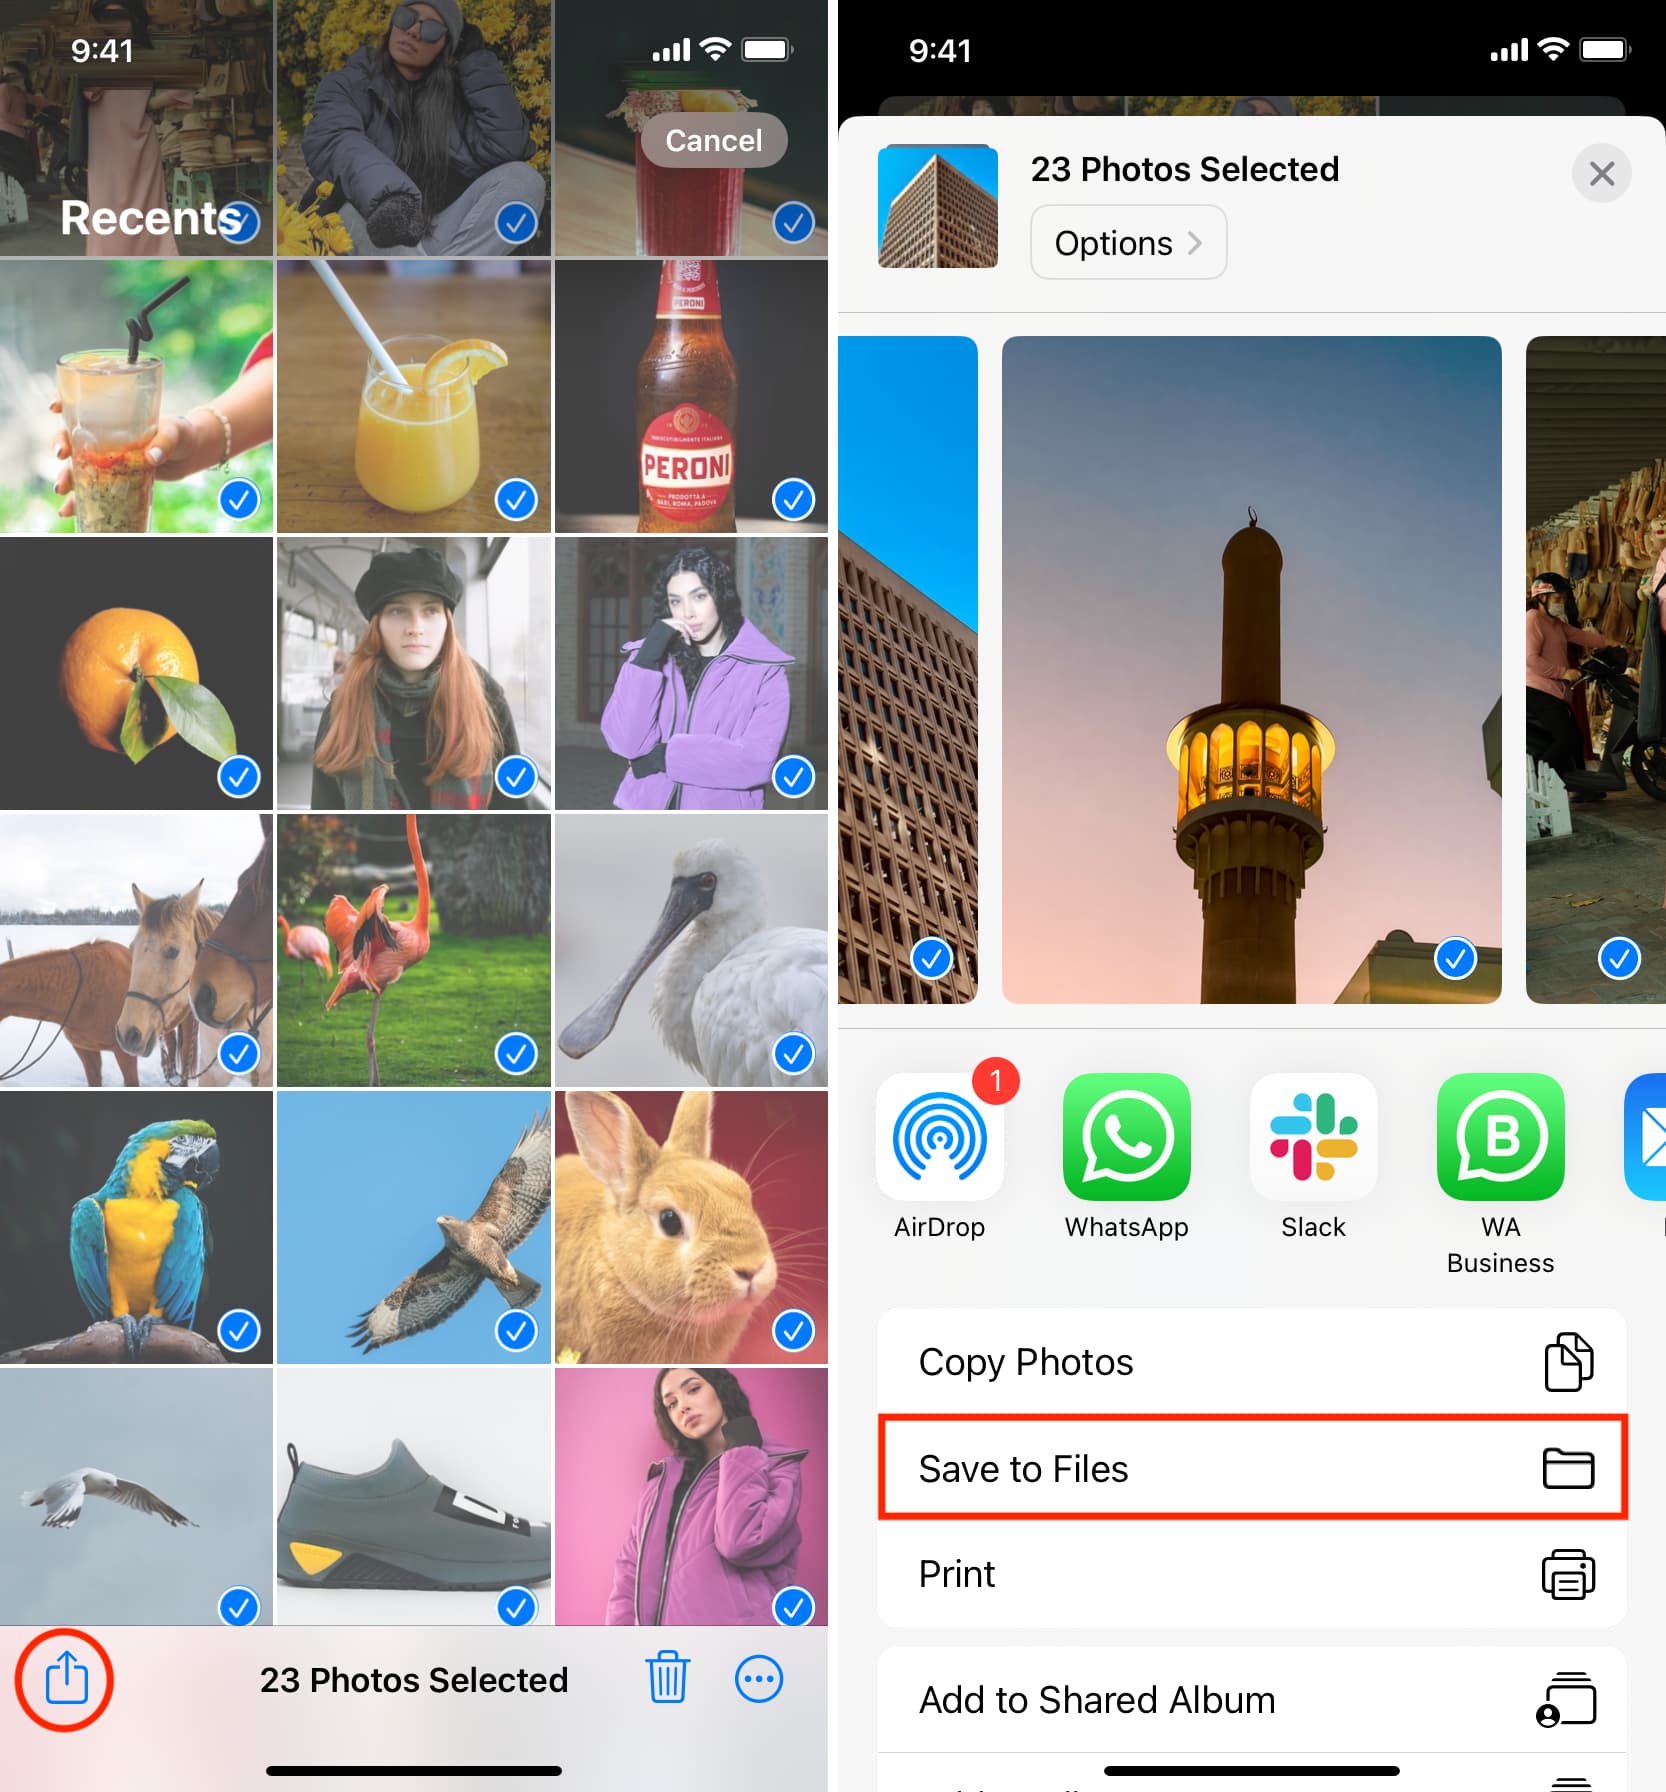 Select images in Photos and save them to Files app on iPhone